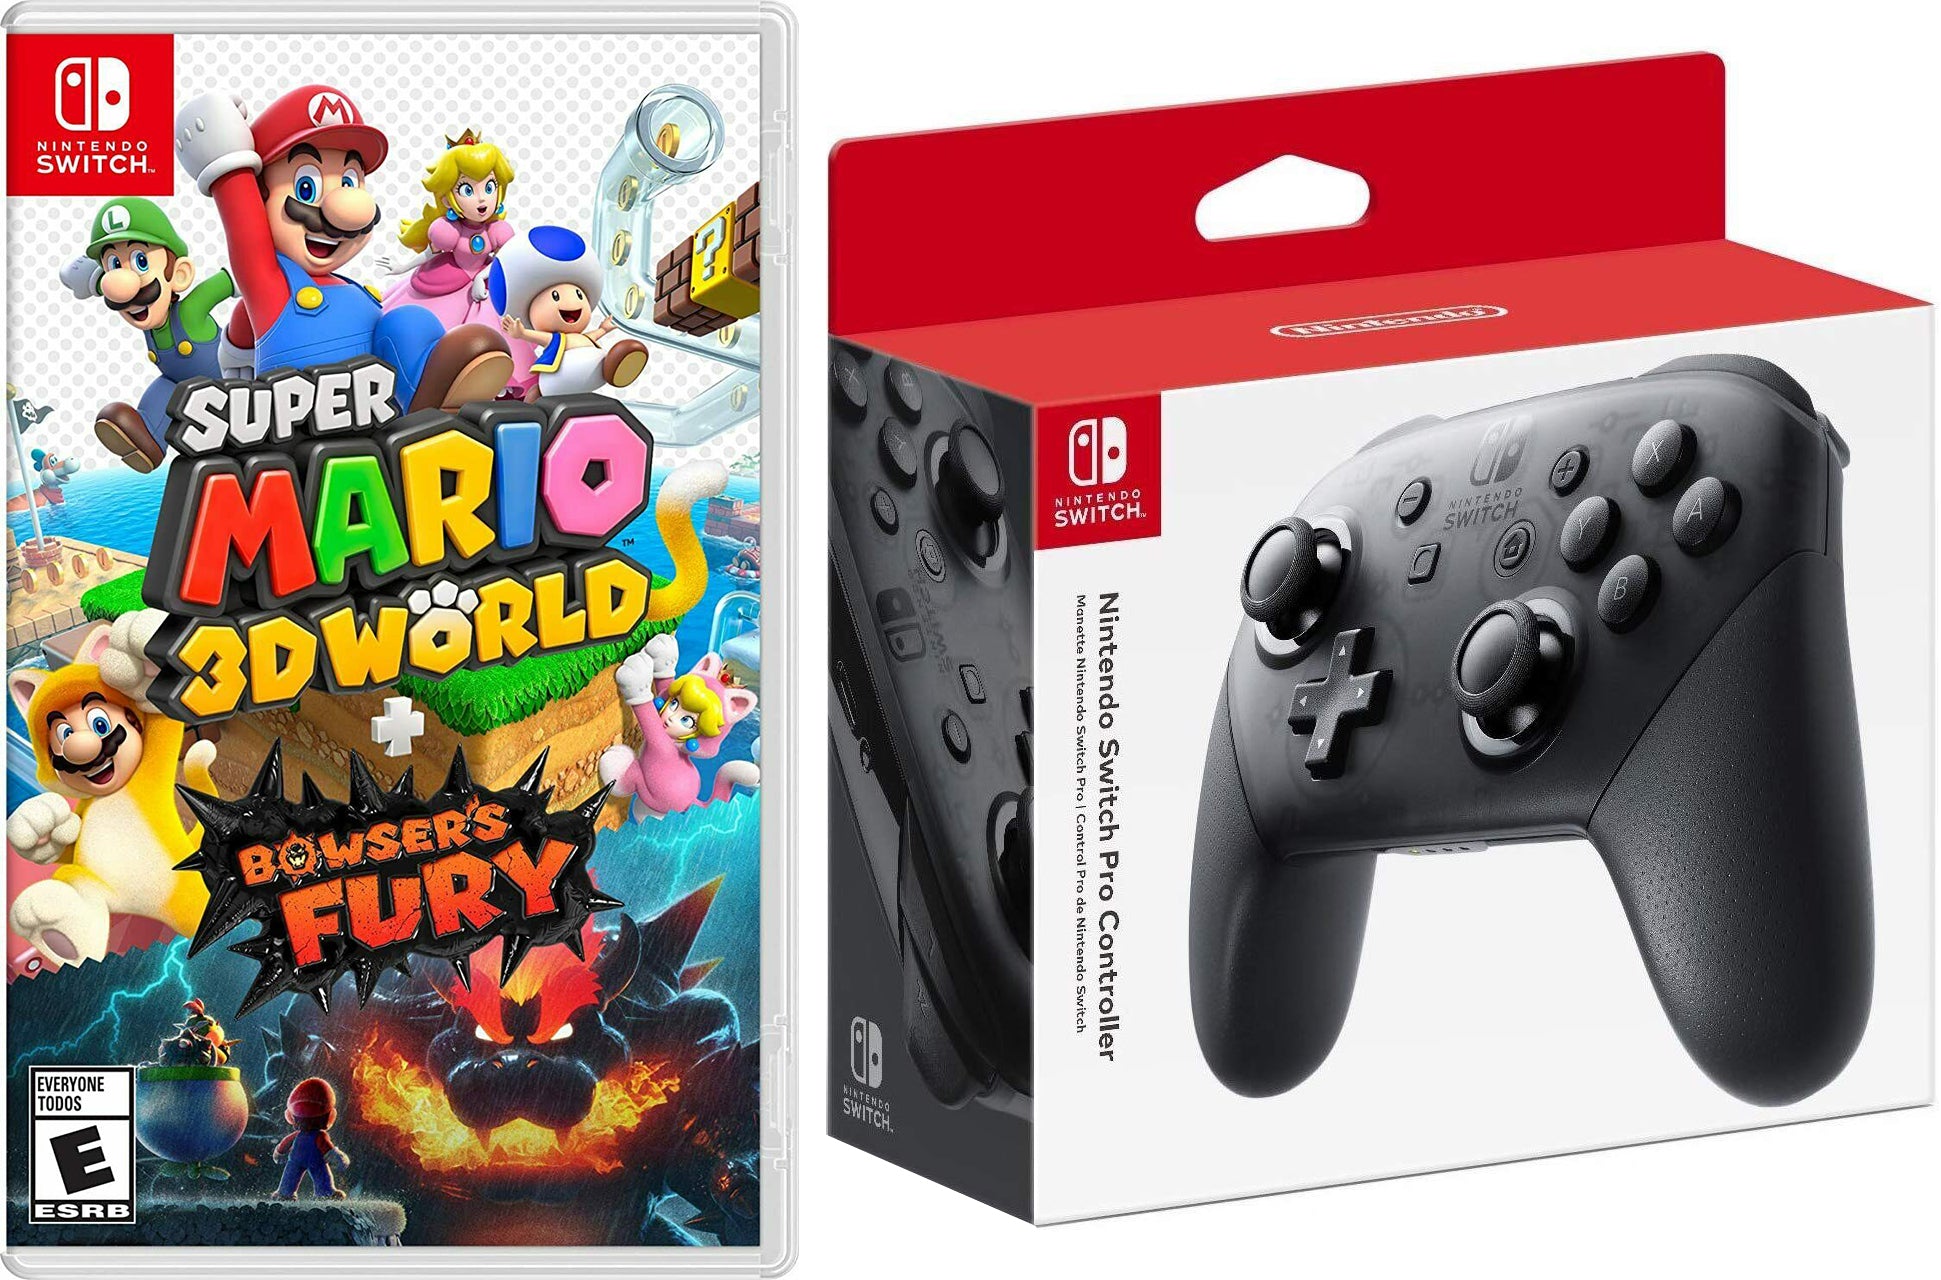 Super Mario 3D World + Bowser’s Fury and Wireless Pro Controller Bundle - Nintendo Switch - Pro-Distributing